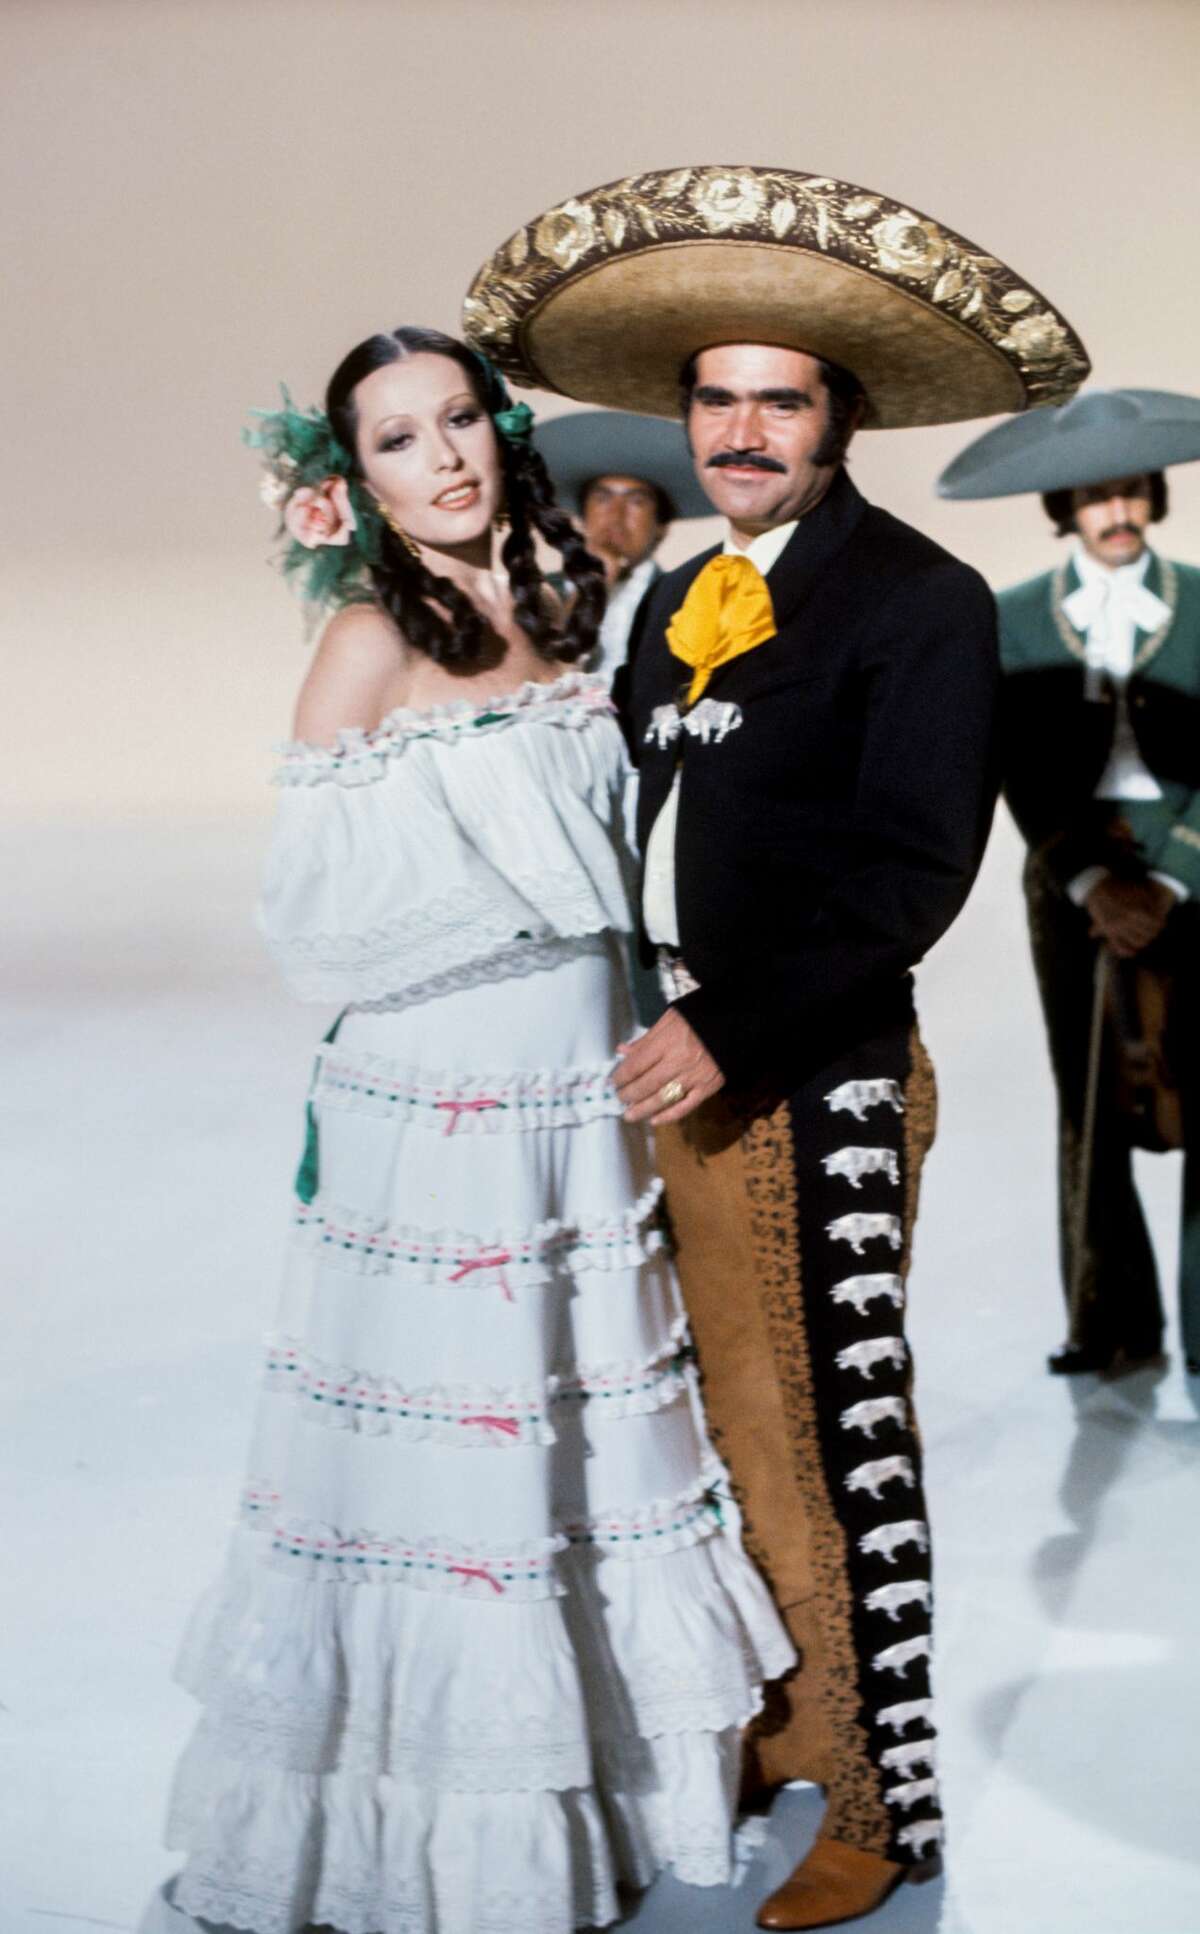 The Mexican singer Vicente Fernandez and Spanish singer Massiel, 1976, Madrid, Spain. (Photo by Gianni Ferrari/Cover/Getty Images).